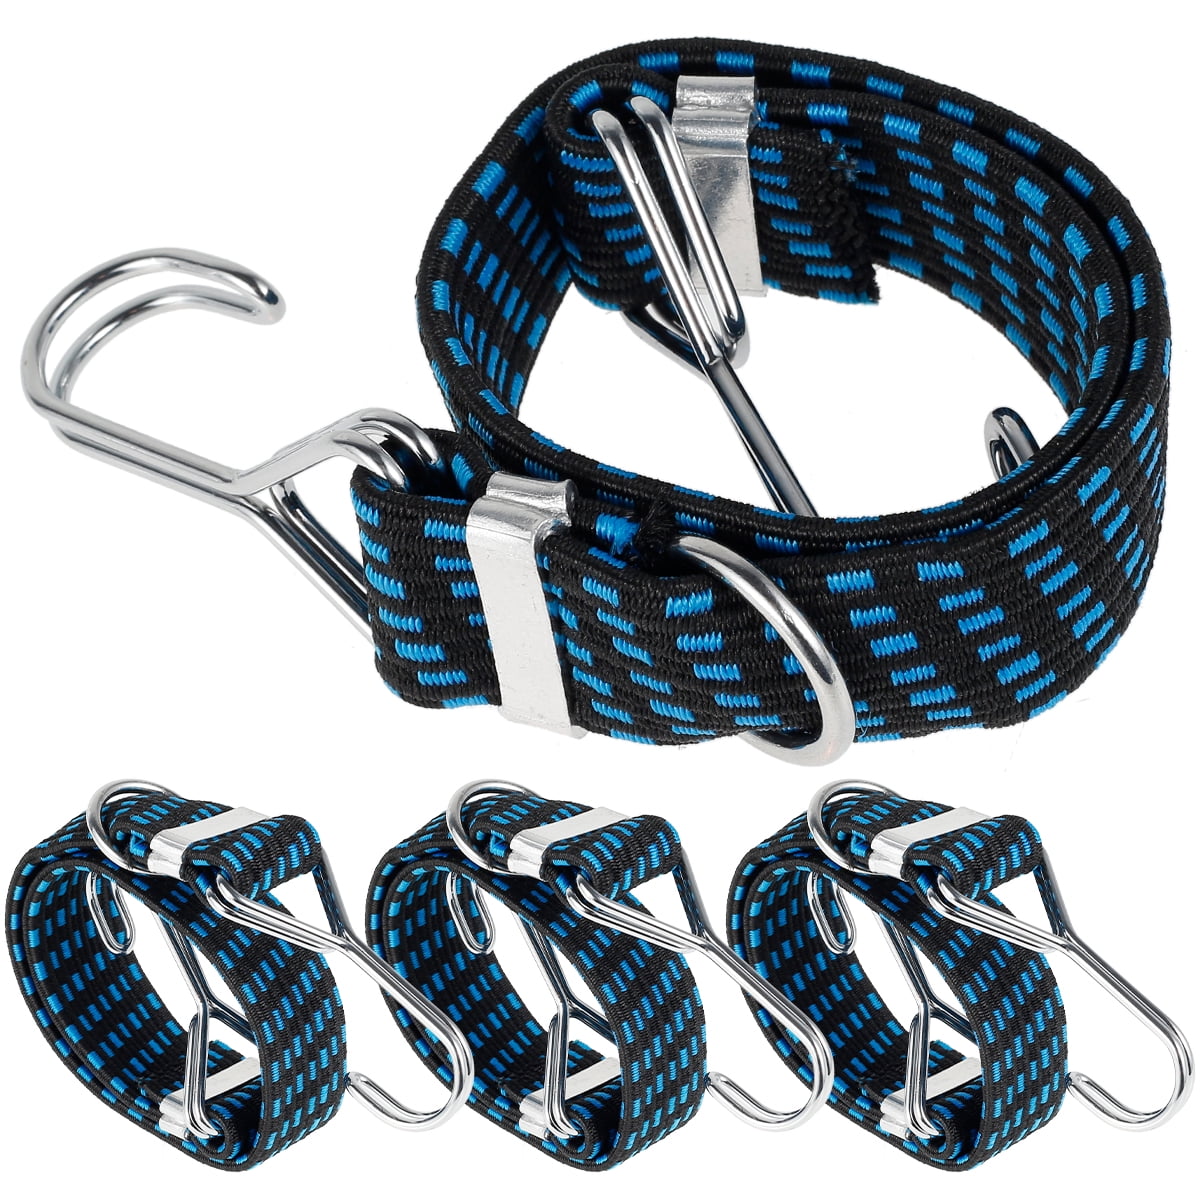 25 ft. Round Stretch Cord with Adjustable Hooks